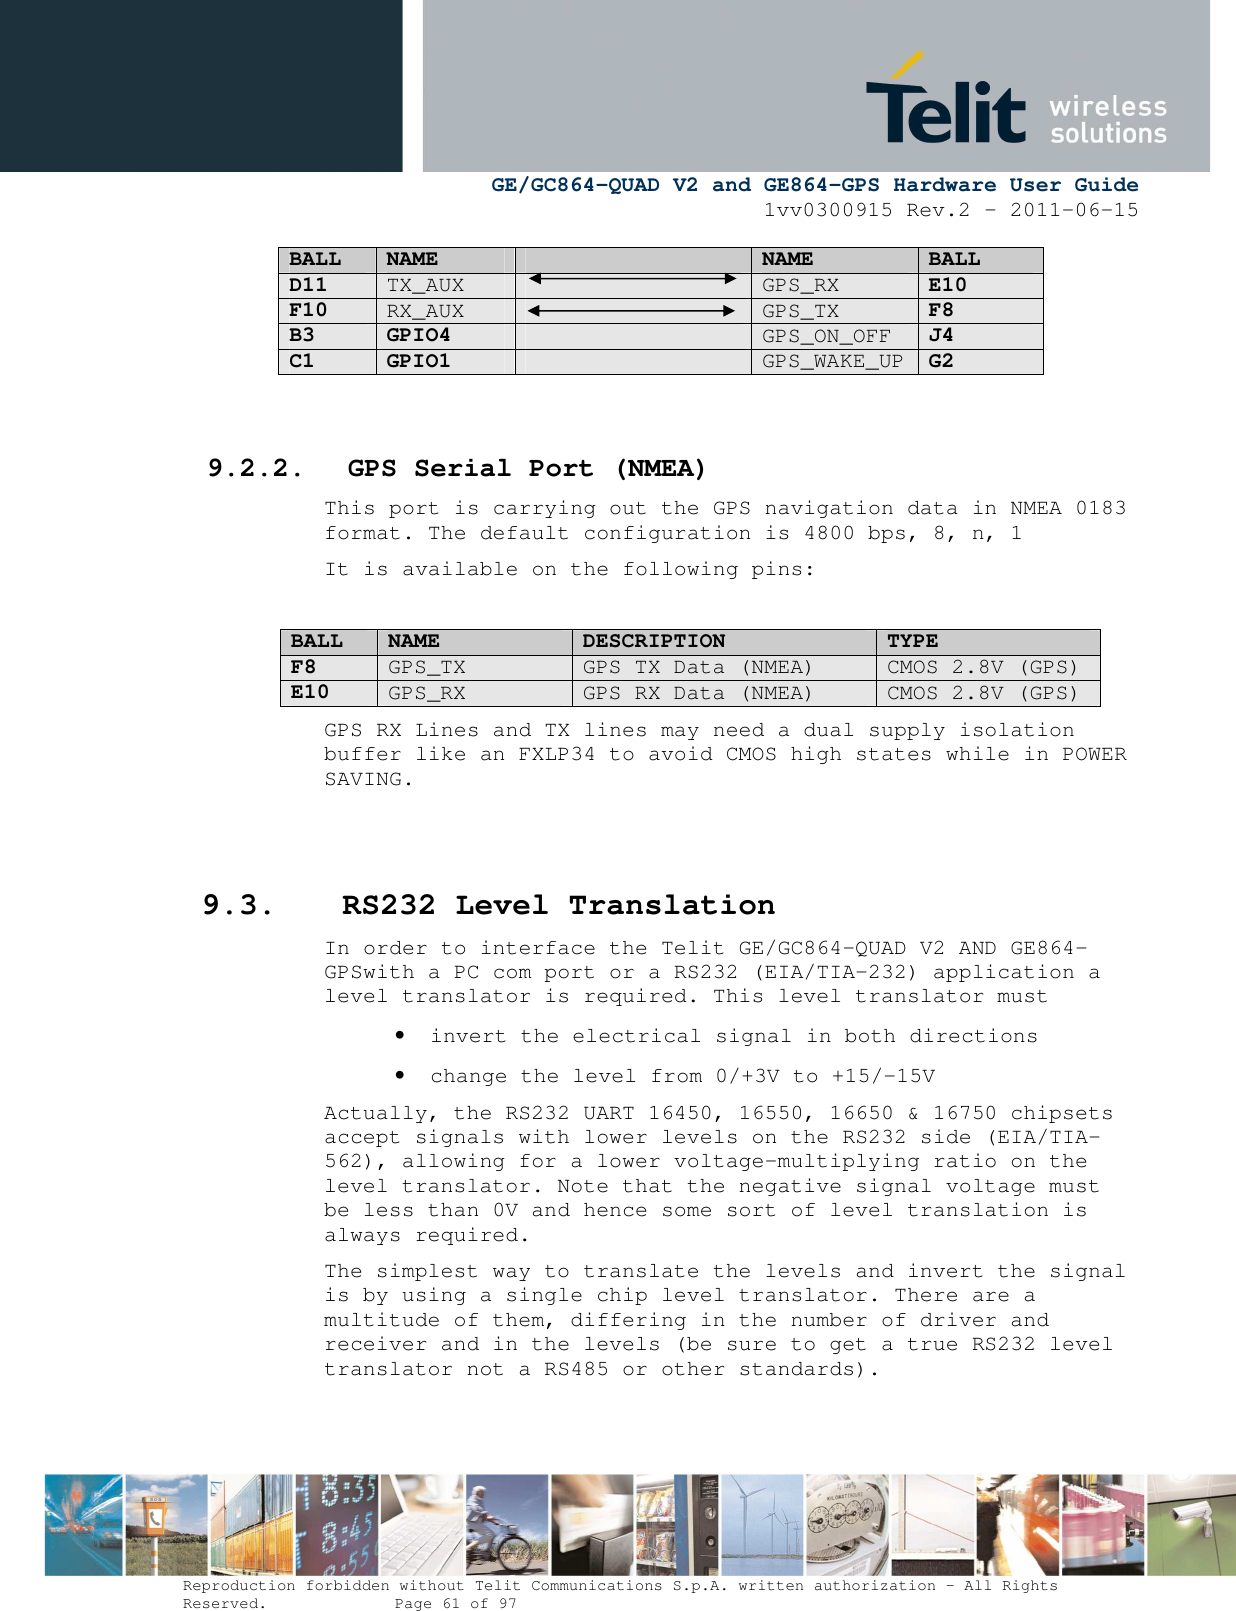      GE/GC864-QUAD V2 and GE864-GPS Hardware User Guide 1vv0300915 Rev.2 – 2011-06-15  Reproduction forbidden without Telit Communications S.p.A. written authorization - All Rights Reserved.    Page 61 of 97  BALL NAME  NAME BALL D11 TX_AUX    GPS_RX E10 F10 RX_AUX    GPS_TX F8 B3 GPIO4   GPS_ON_OFF J4 C1 GPIO1   GPS_WAKE_UP G2    9.2.2. GPS Serial Port (NMEA) This port is carrying out the GPS navigation data in NMEA 0183 format. The default configuration is 4800 bps, 8, n, 1 It is available on the following pins:  BALL NAME DESCRIPTION TYPE F8 GPS_TX  GPS TX Data (NMEA)  CMOS 2.8V (GPS) E10 GPS_RX  GPS RX Data (NMEA)  CMOS 2.8V (GPS) GPS RX Lines and TX lines may need a dual supply isolation buffer like an FXLP34 to avoid CMOS high states while in POWER SAVING.   9.3. RS232 Level Translation In order to interface the Telit GE/GC864-QUAD V2 AND GE864-GPSwith a PC com port or a RS232 (EIA/TIA-232) application a level translator is required. This level translator must • invert the electrical signal in both directions • change the level from 0/+3V to +15/-15V Actually, the RS232 UART 16450, 16550, 16650 &amp; 16750 chipsets accept signals with lower levels on the RS232 side (EIA/TIA-562), allowing for a lower voltage-multiplying ratio on the level translator. Note that the negative signal voltage must be less than 0V and hence some sort of level translation is always required.  The simplest way to translate the levels and invert the signal is by using a single chip level translator. There are a multitude of them, differing in the number of driver and receiver and in the levels (be sure to get a true RS232 level translator not a RS485 or other standards). 